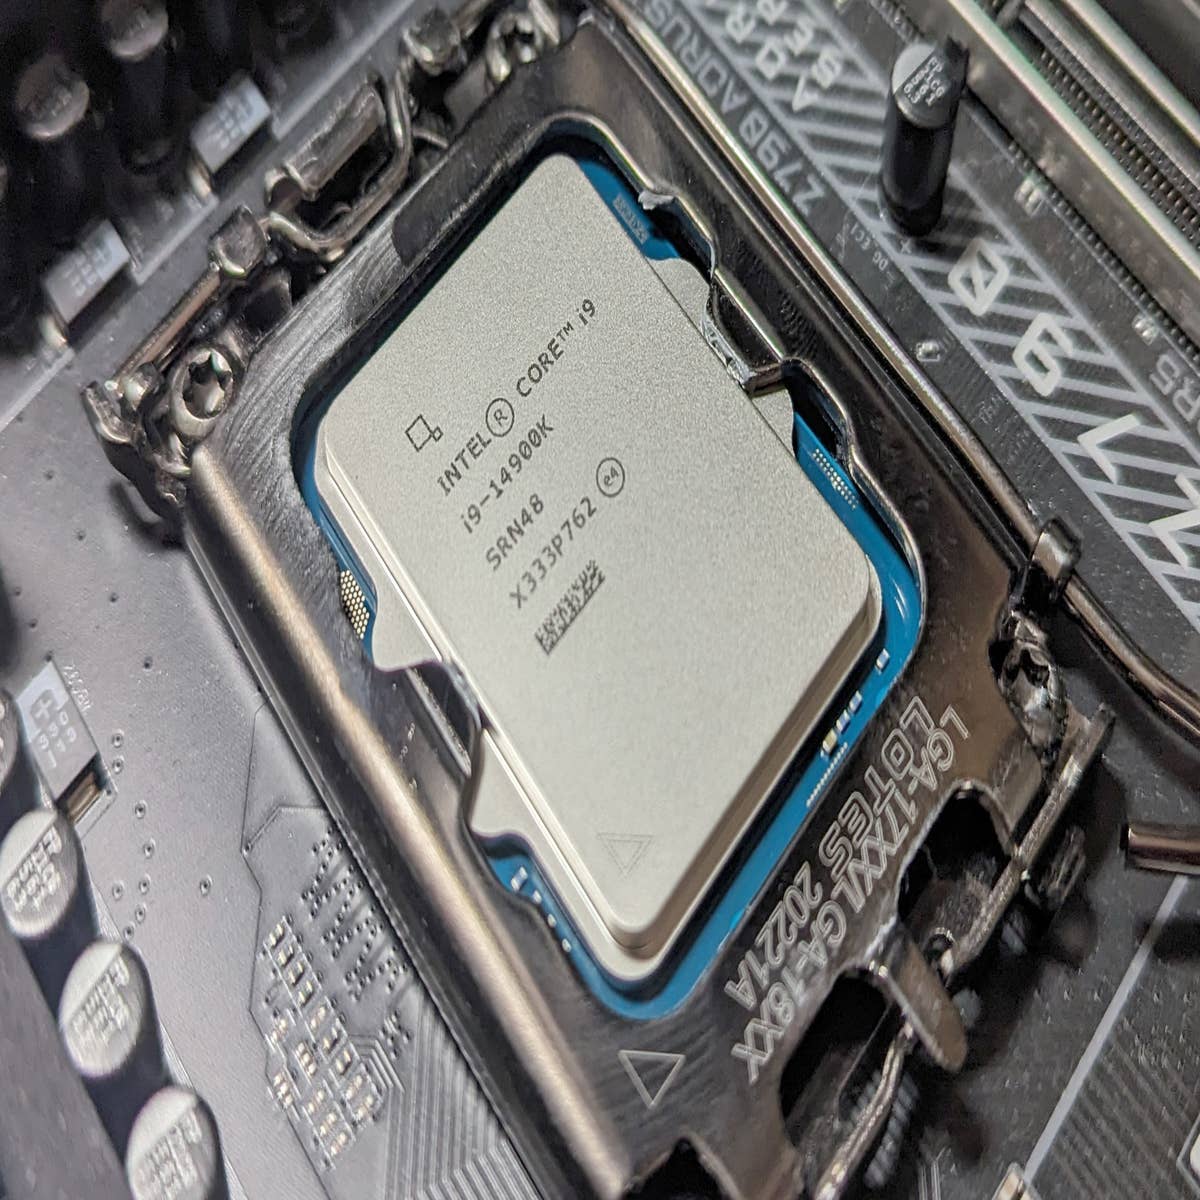 Core i5-14600K/i9-14900K review: Intel snatches crown from AMD's Ryzen  7950X3D, with 6GHz - Neowin